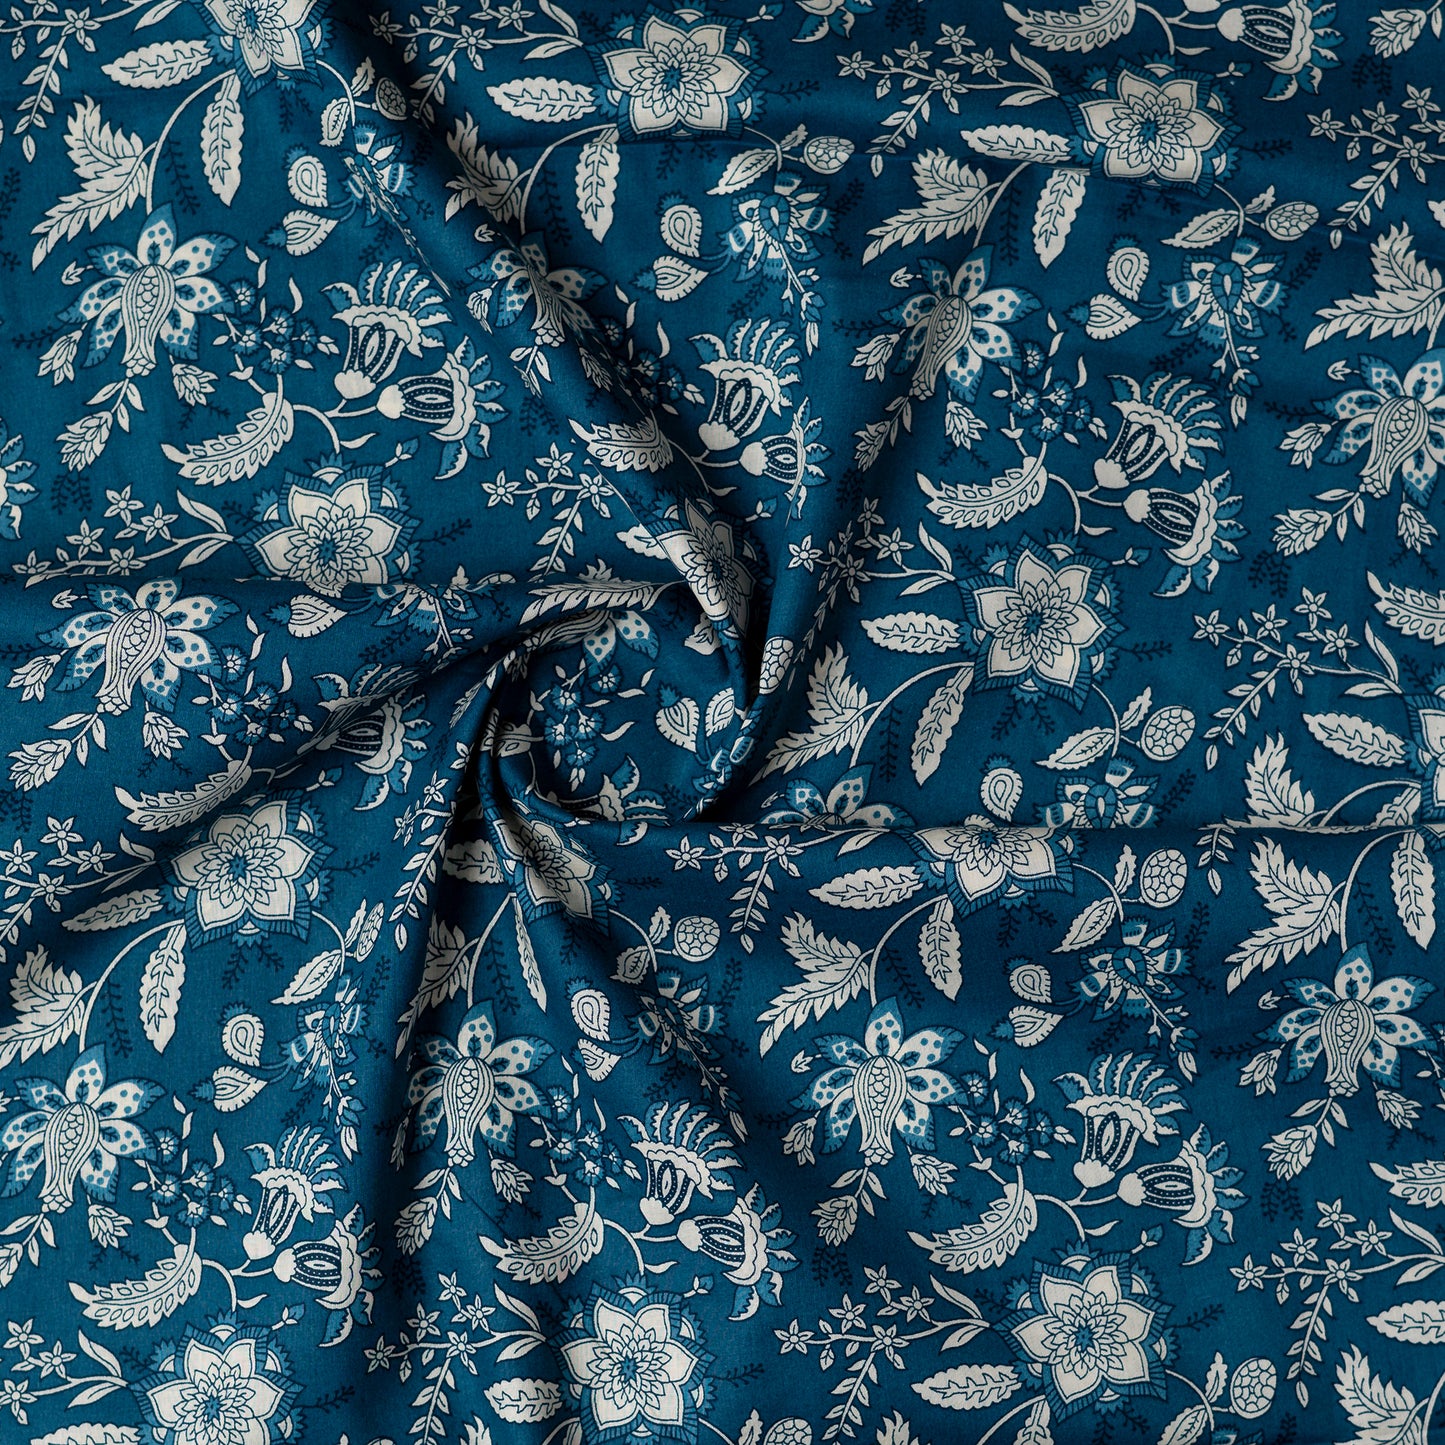 cotton printed fabric in blue color, it has 44 inches width, you can buy as many meters as per your requirement